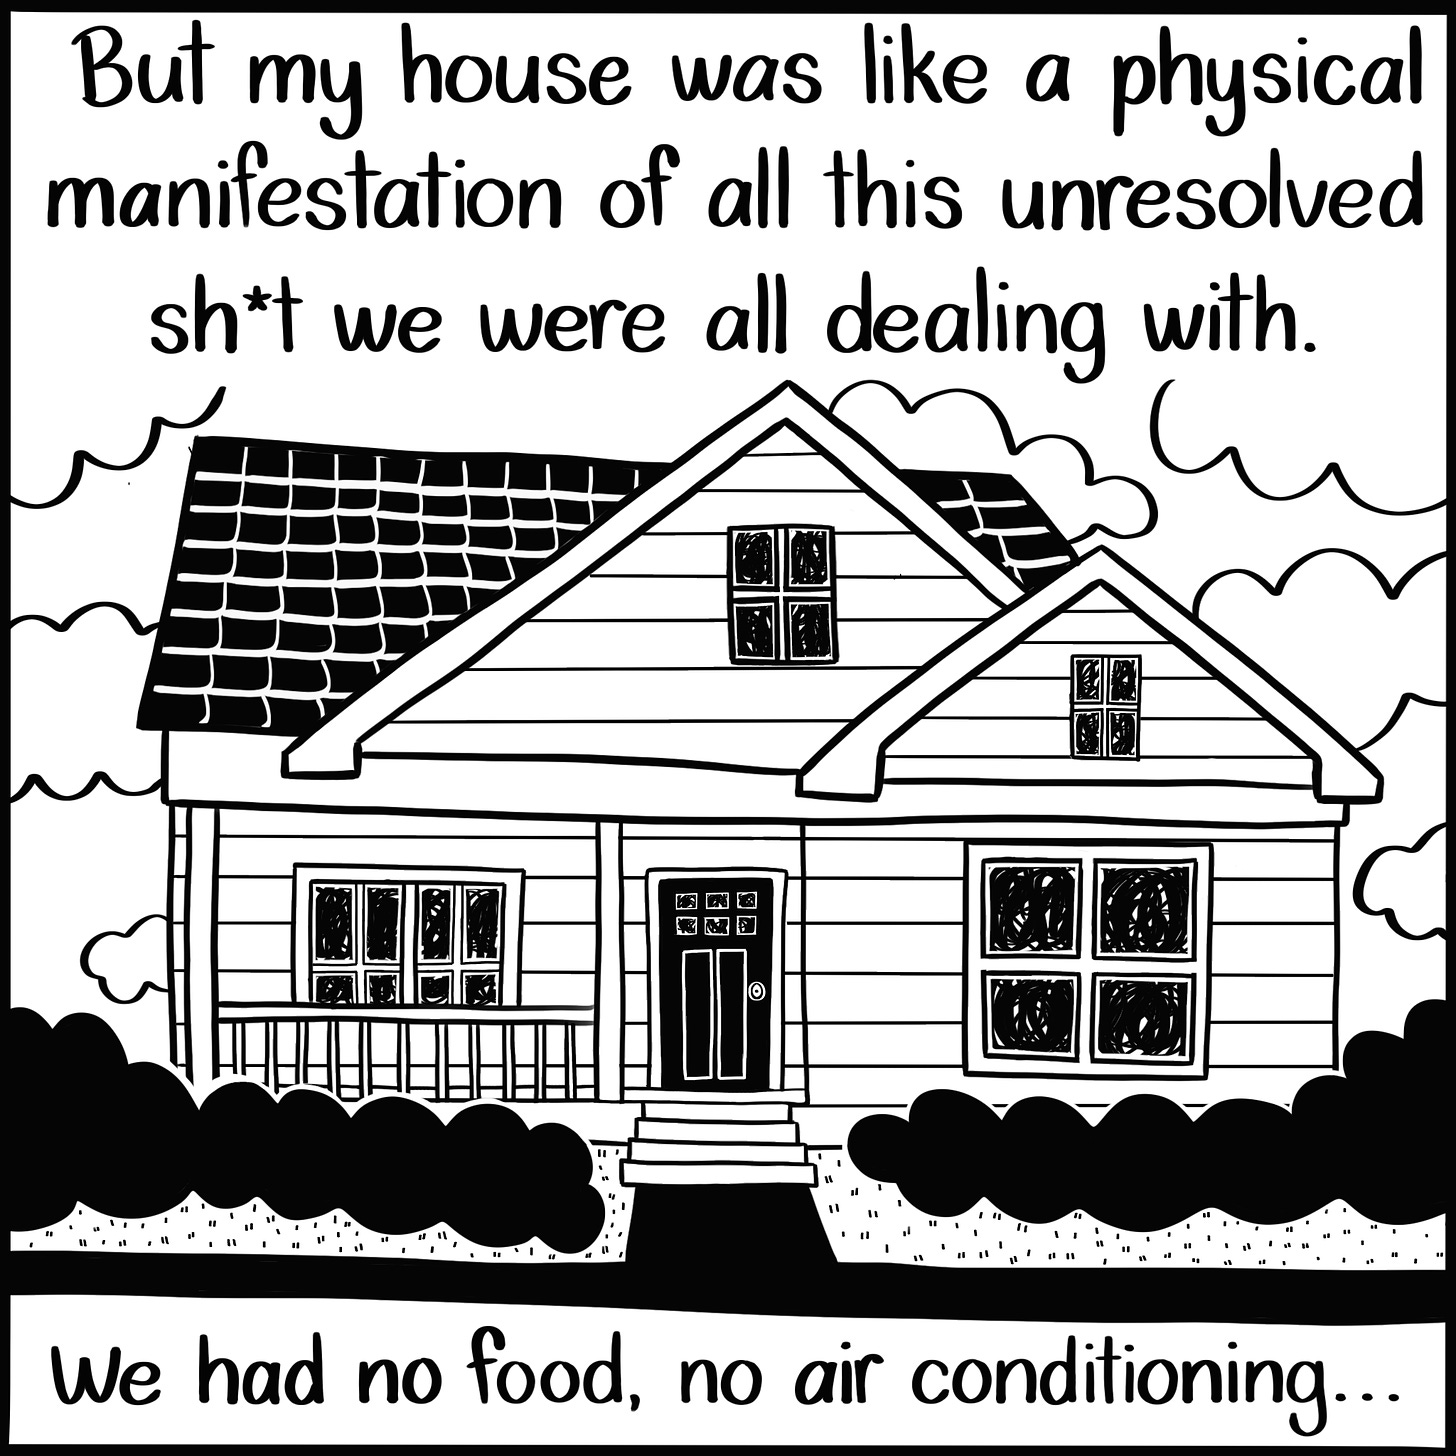 Caption: But my house was like a physical manifestation of all this unresolved sh*t we were all dealing with. We had no food, no air conditioning... Image: A bungalow-style home surrounded by bushes. In the windows, scribbles fill in the blank space.